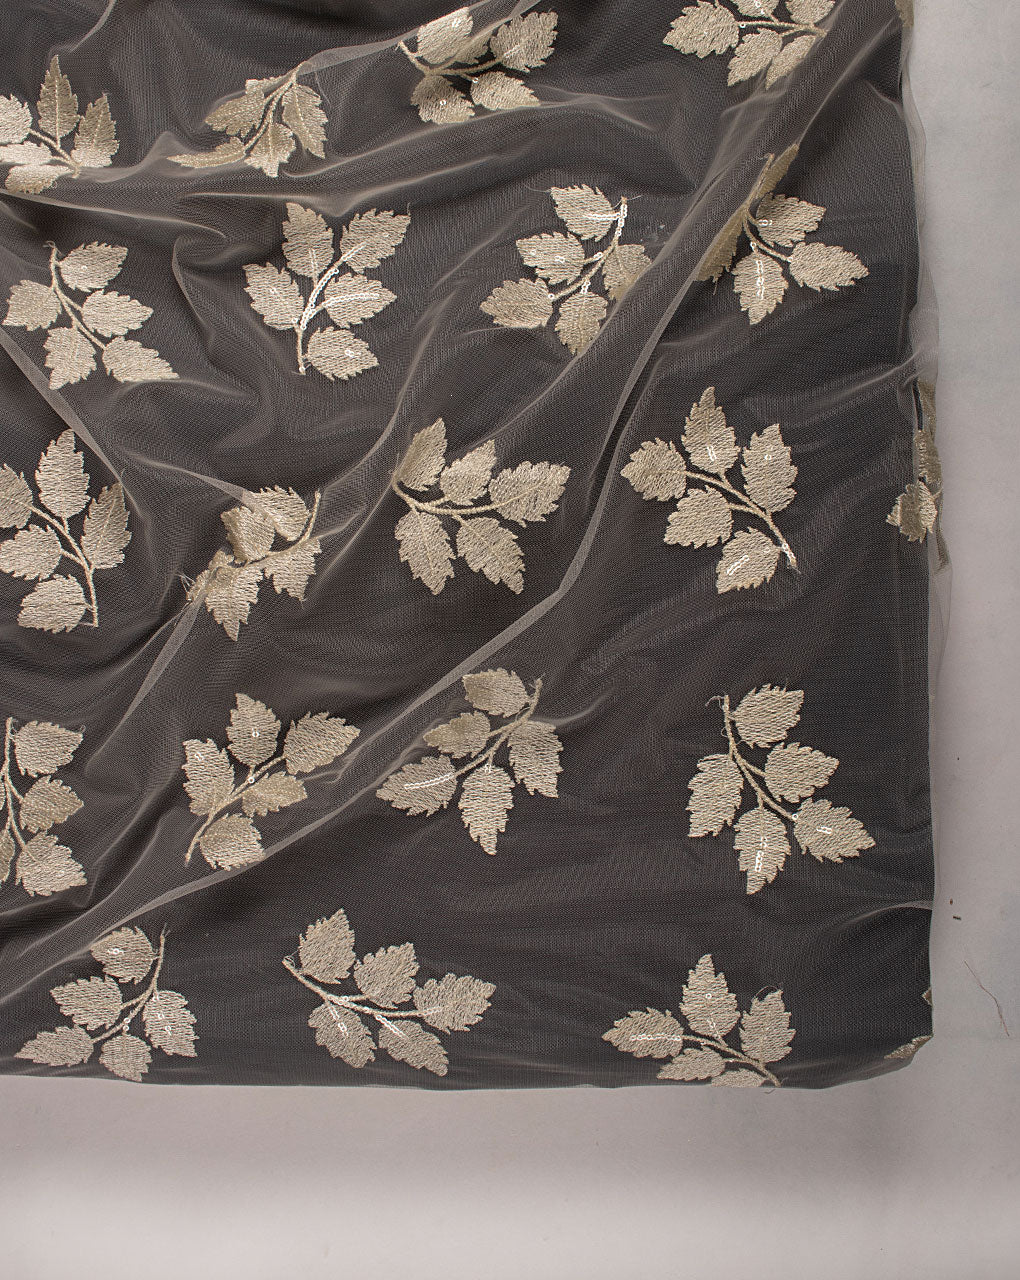 Embroidery Fabric - Buy Embroidery Print Fabric Online at Best Price